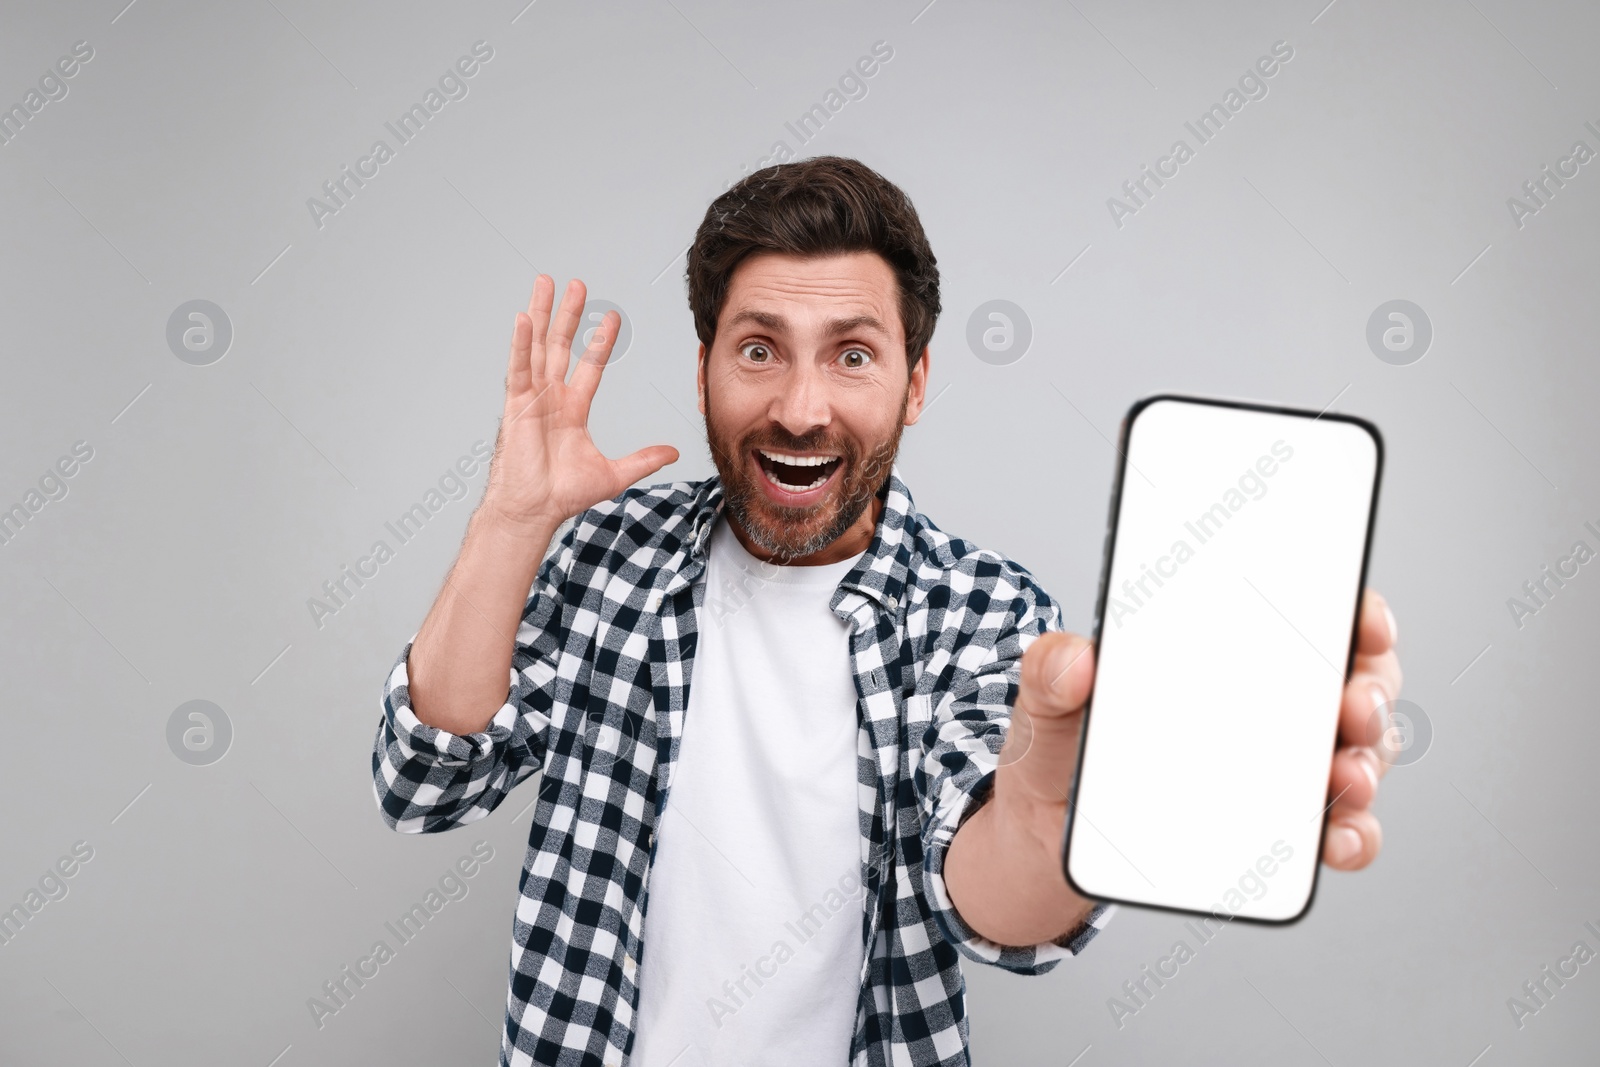 Photo of Surprised man showing smartphone in hand on light grey background